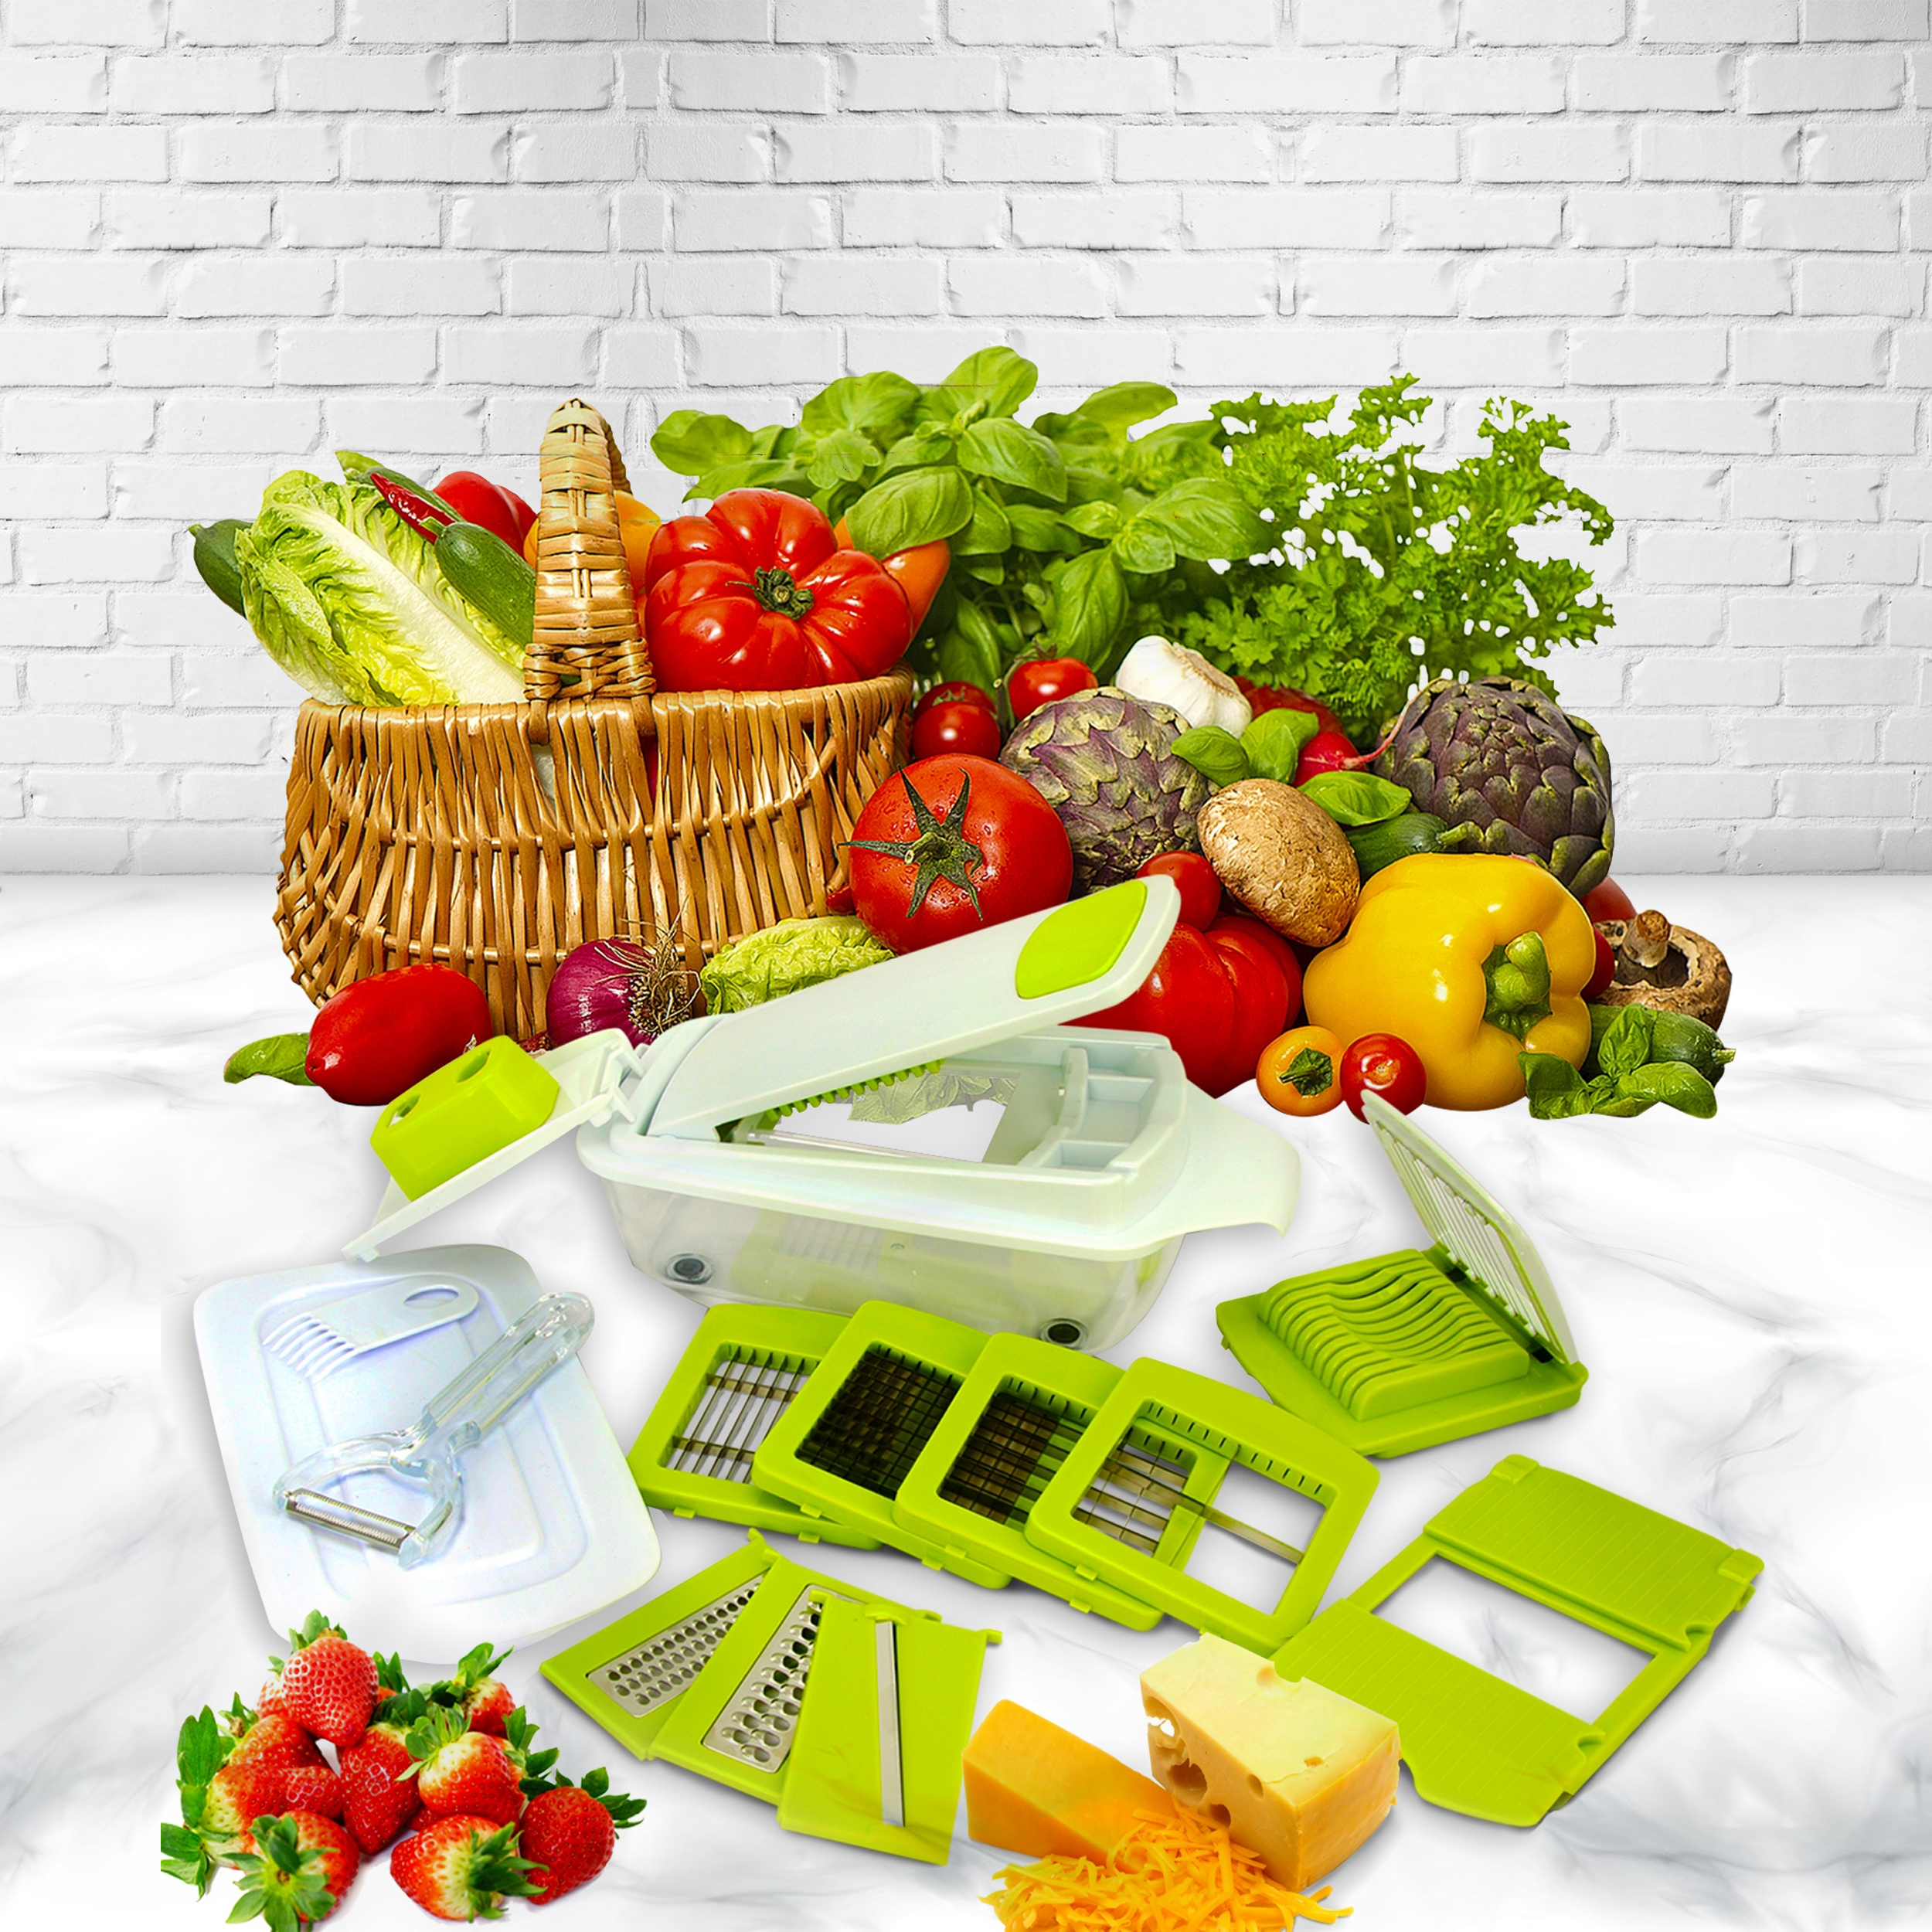 MegaChef 8 in 1 Multi-Use Slicer Dicer and Chopper with Interchangeable  Blades, - 8646184